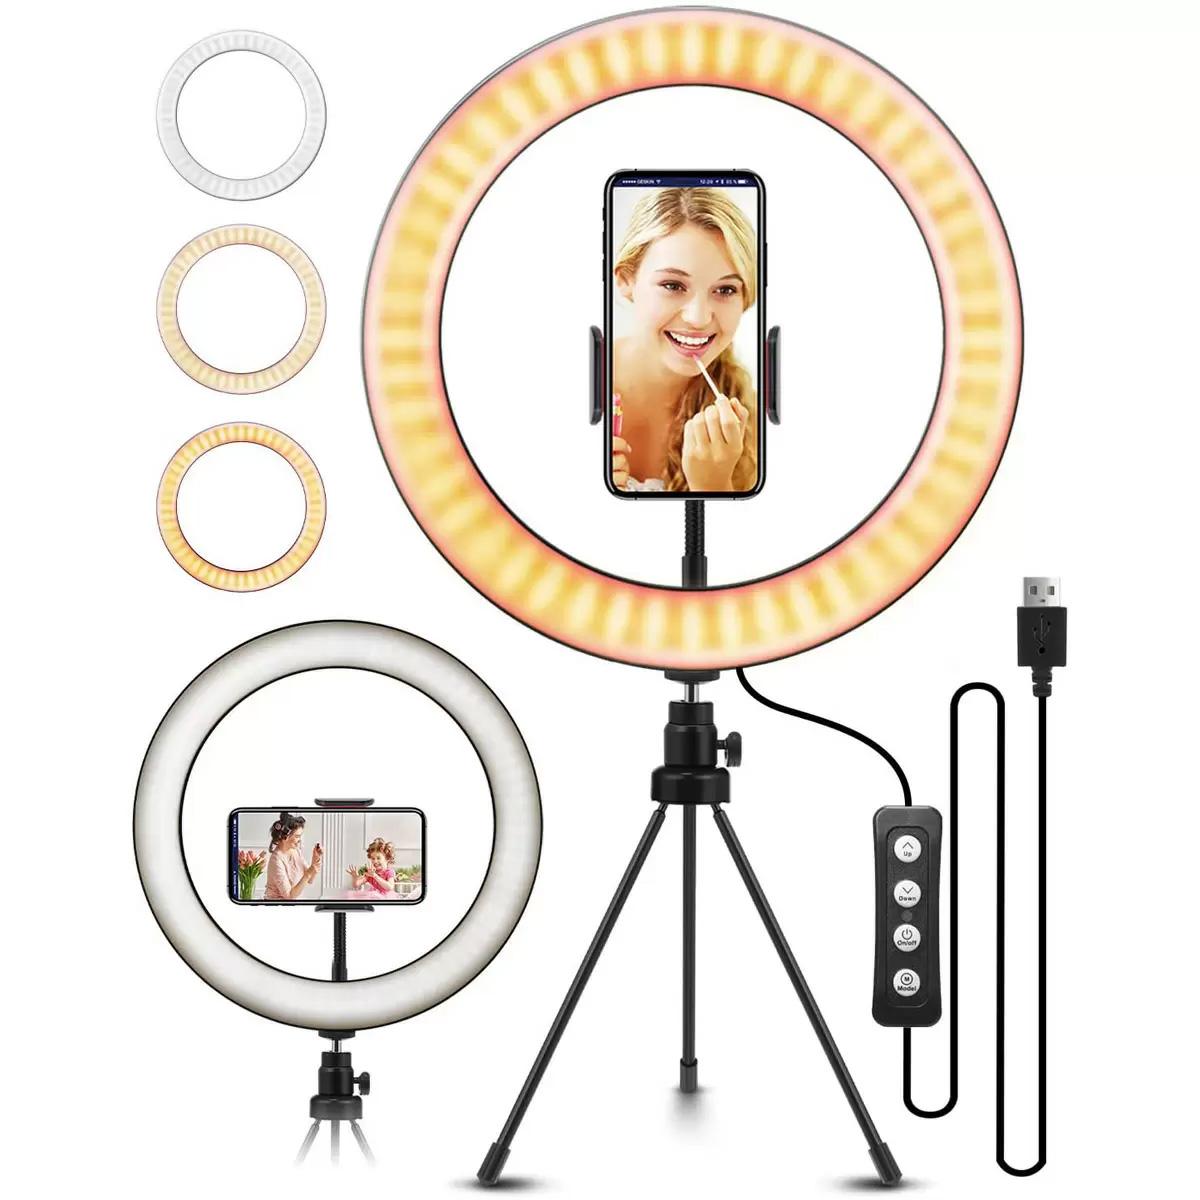 Elegiant Selfie Ring Light with Tripod Stand and Phone Holder for $9.19